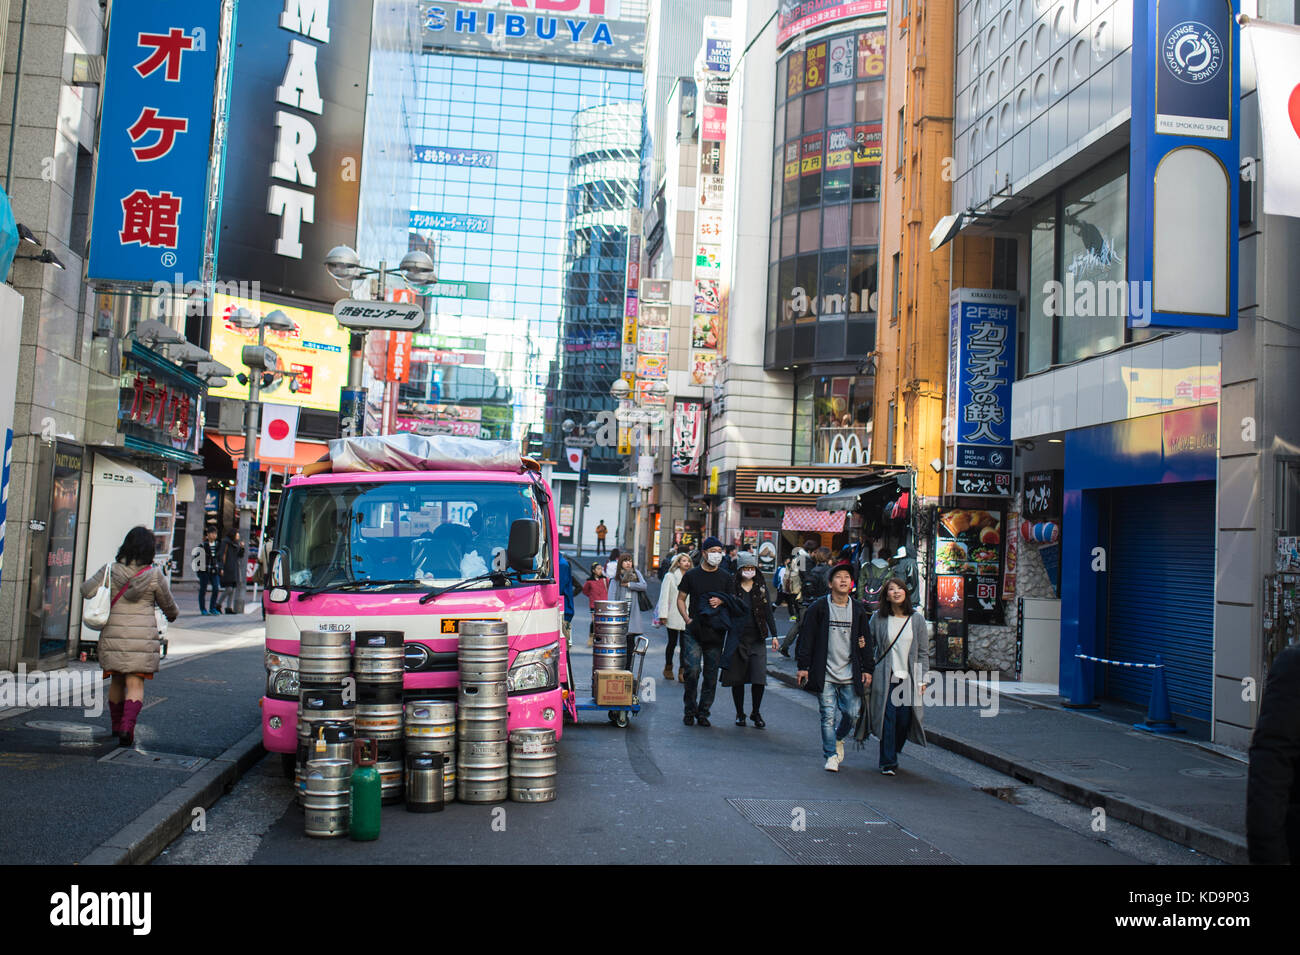 TOKYO - JAPAN - JANUARY 4, 2017. A pink truck with barrels is parked in the streets of Shinjuku while people walk around. Shinjuku is a special ward i Stock Photo